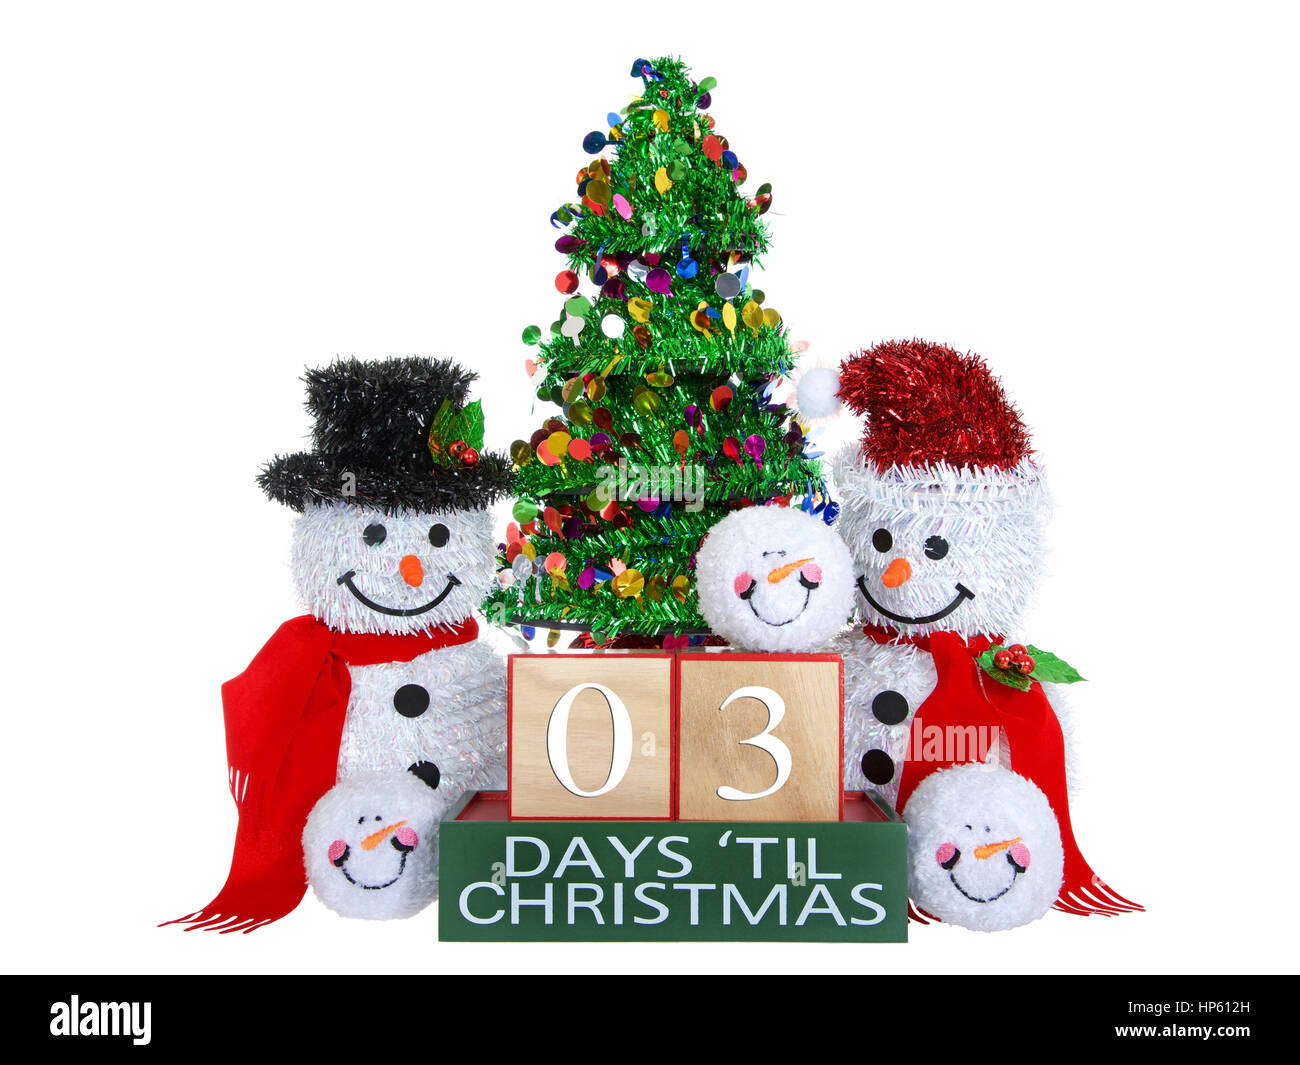 03 Days until Christmas light beech wood blocks with red trim on a green base with tinsel christmas tree, mr and mrs snowman and snowball snowmen head Stock Photo